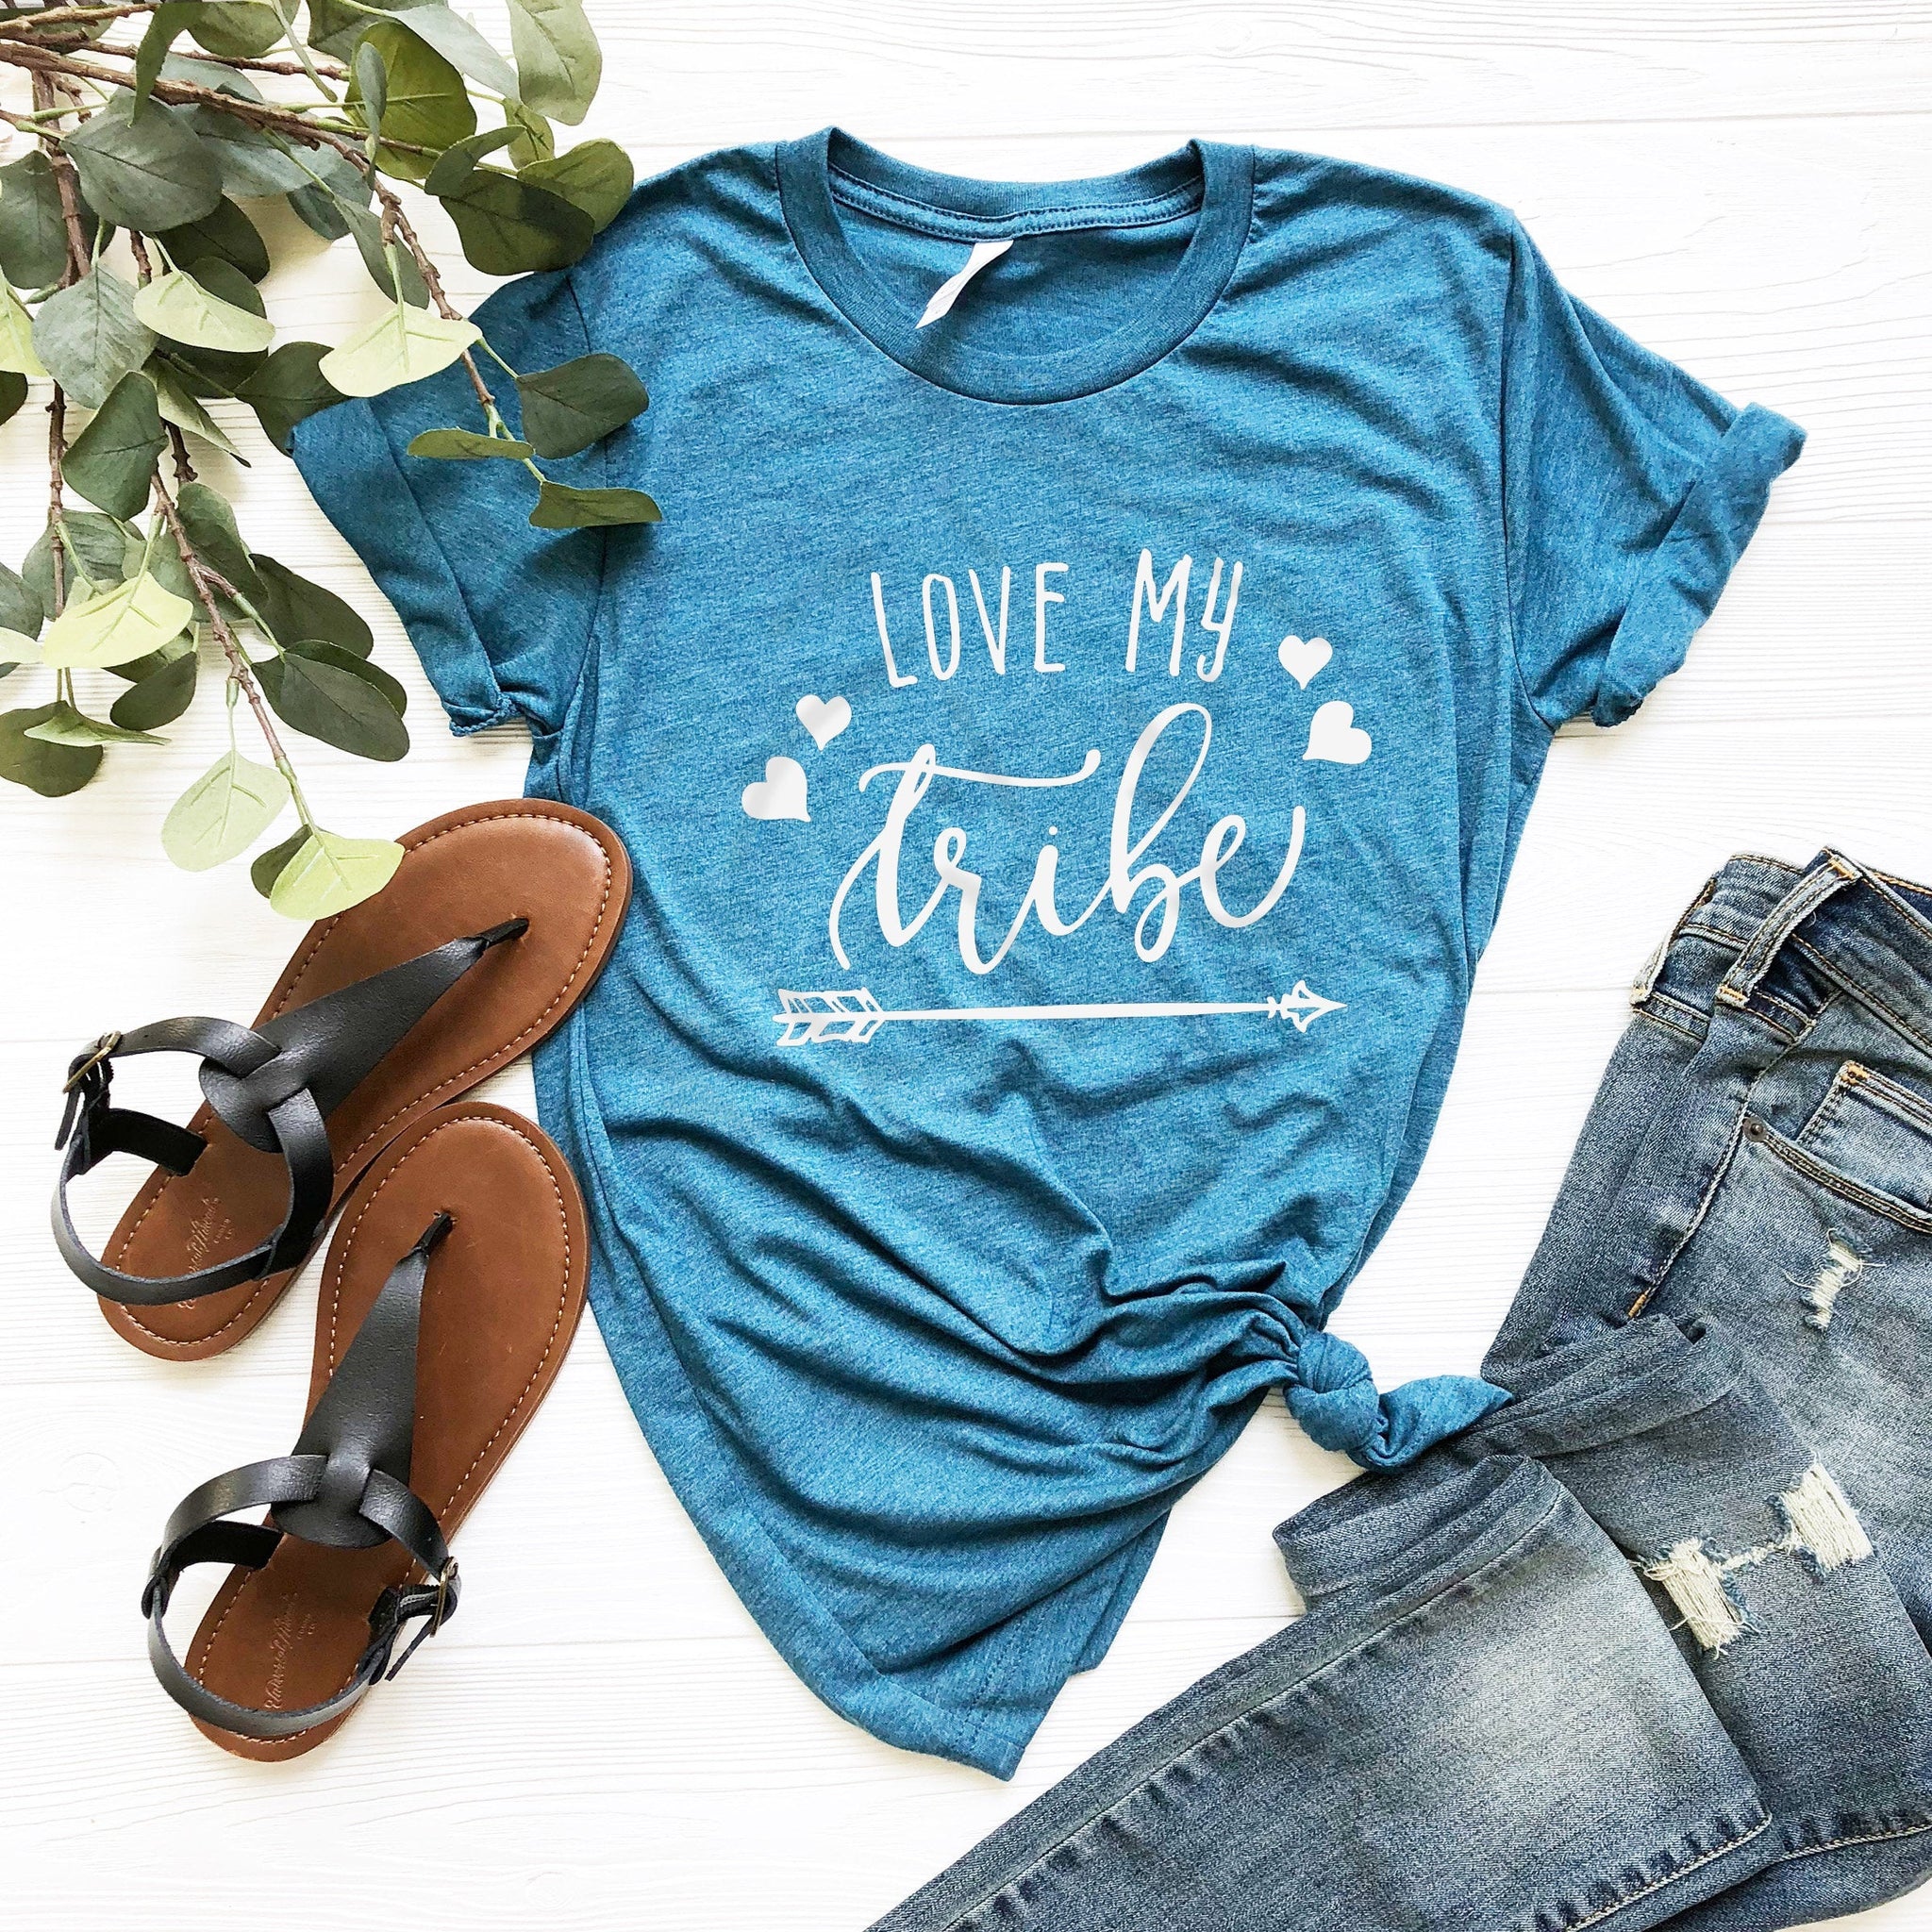 Love My Family, Family shirt, Wife Shirt, Love My Tribe, Gift For Her, Gift For Him, Funny Shirt, Wife Shirt, Husband Shirt - Fastdeliverytees.com